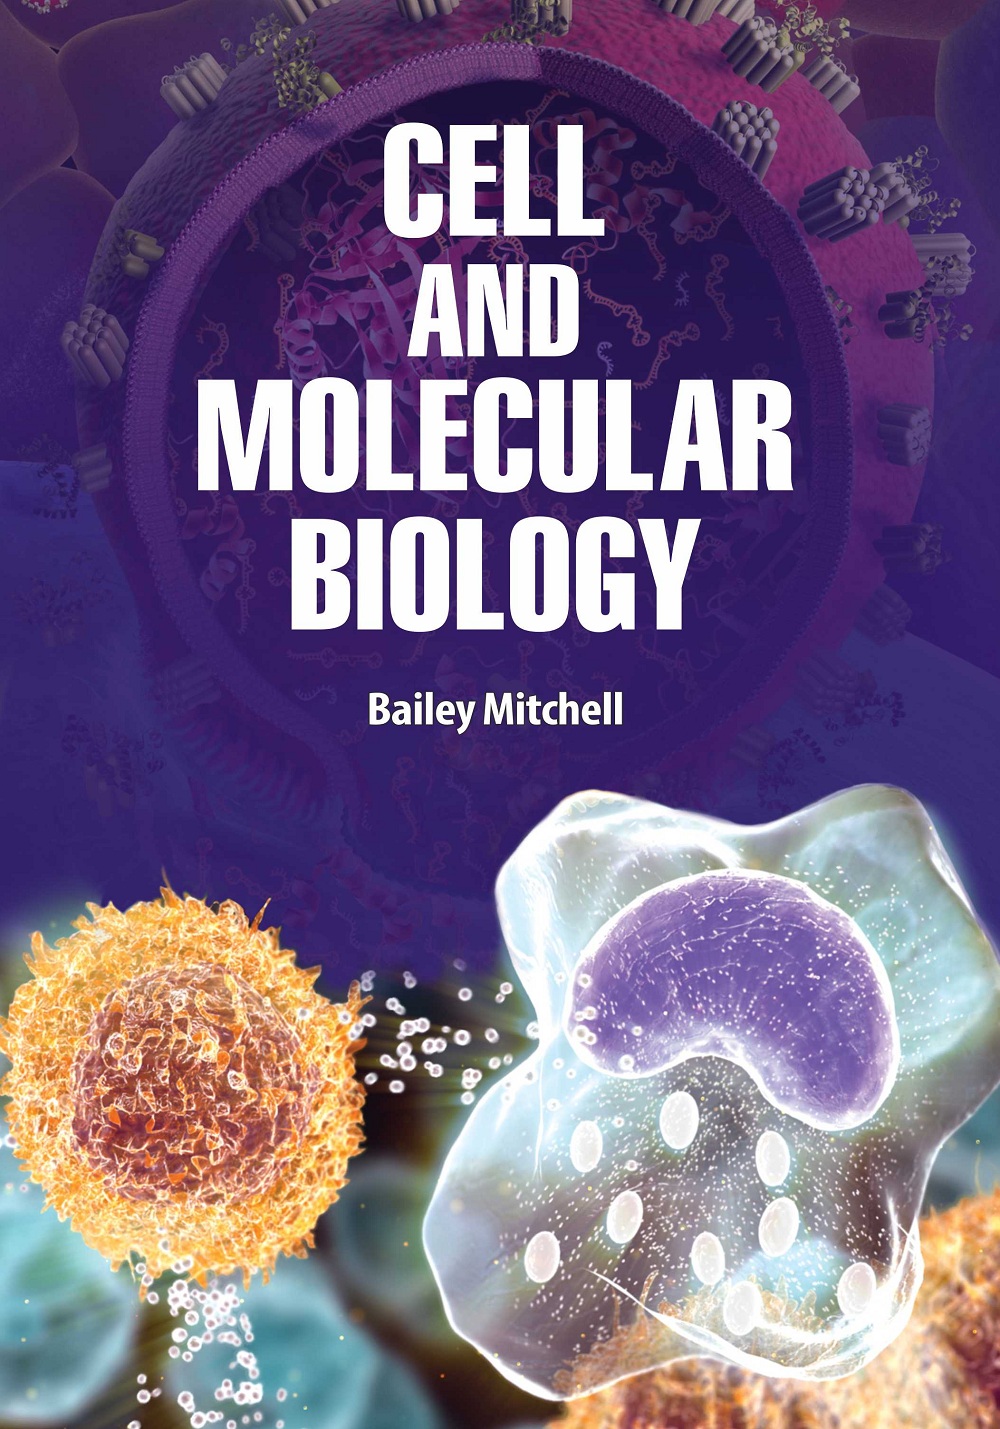 cell and molecular biology research papers